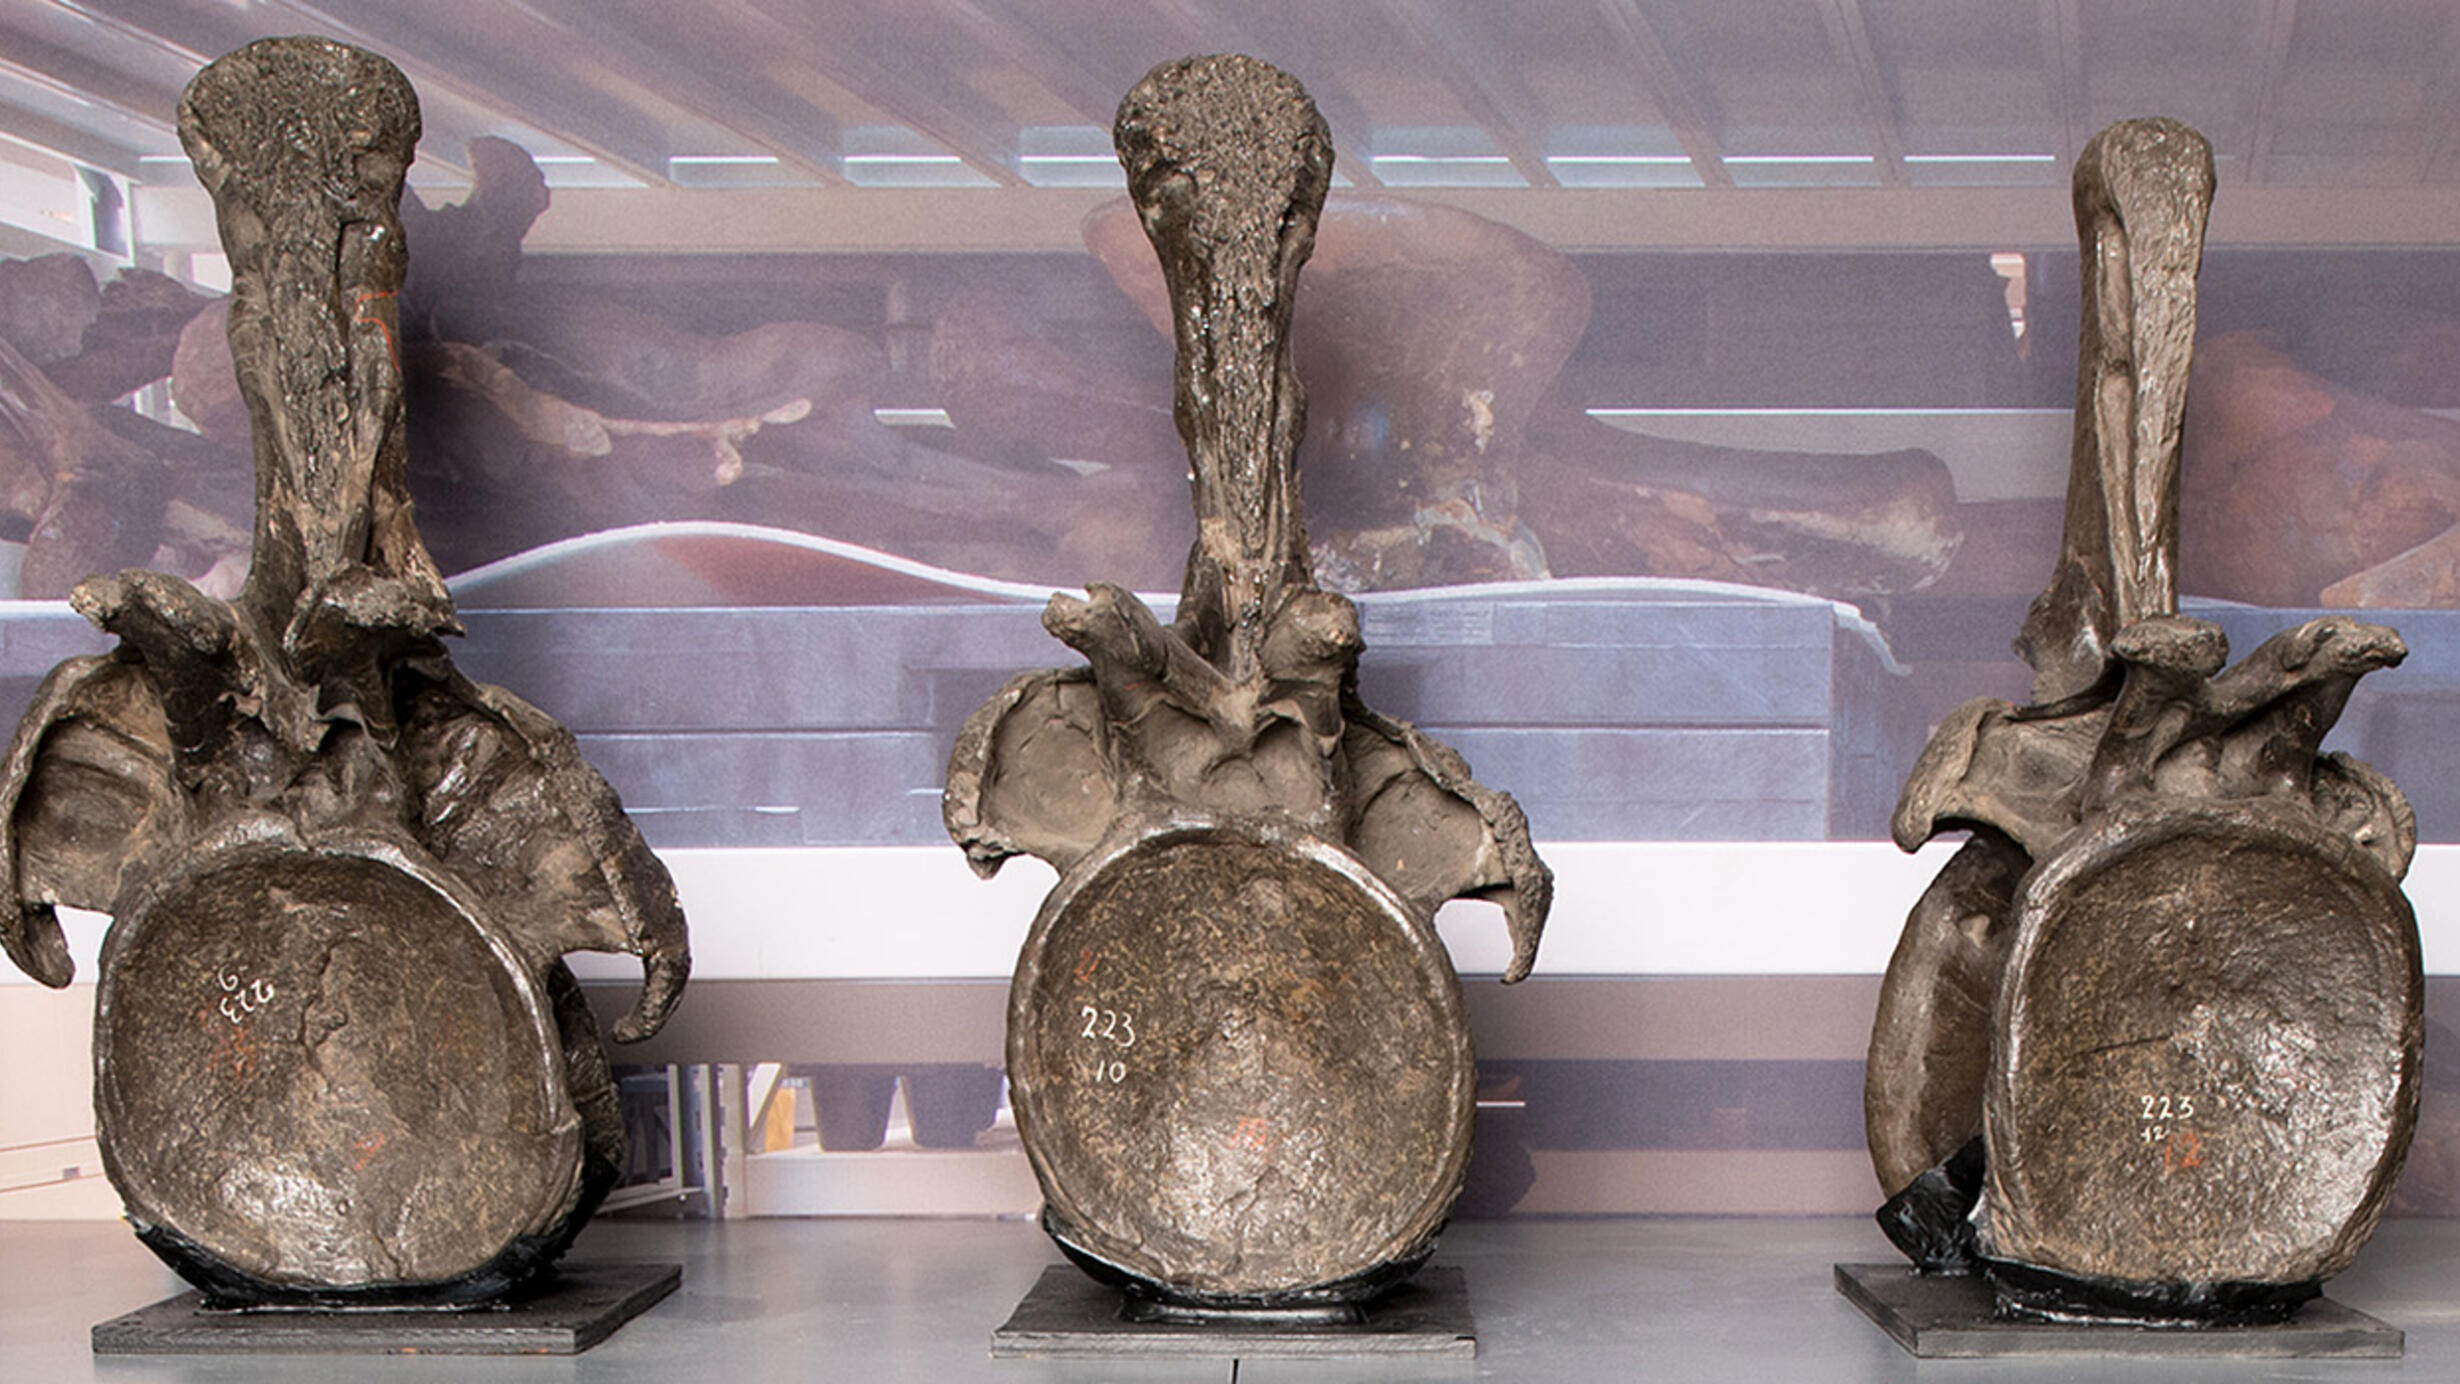 Three extremely large vertebrae are displayed side-by-side on a shelf against a printed backdrop depicting the Museum's actual bone storage shelves.